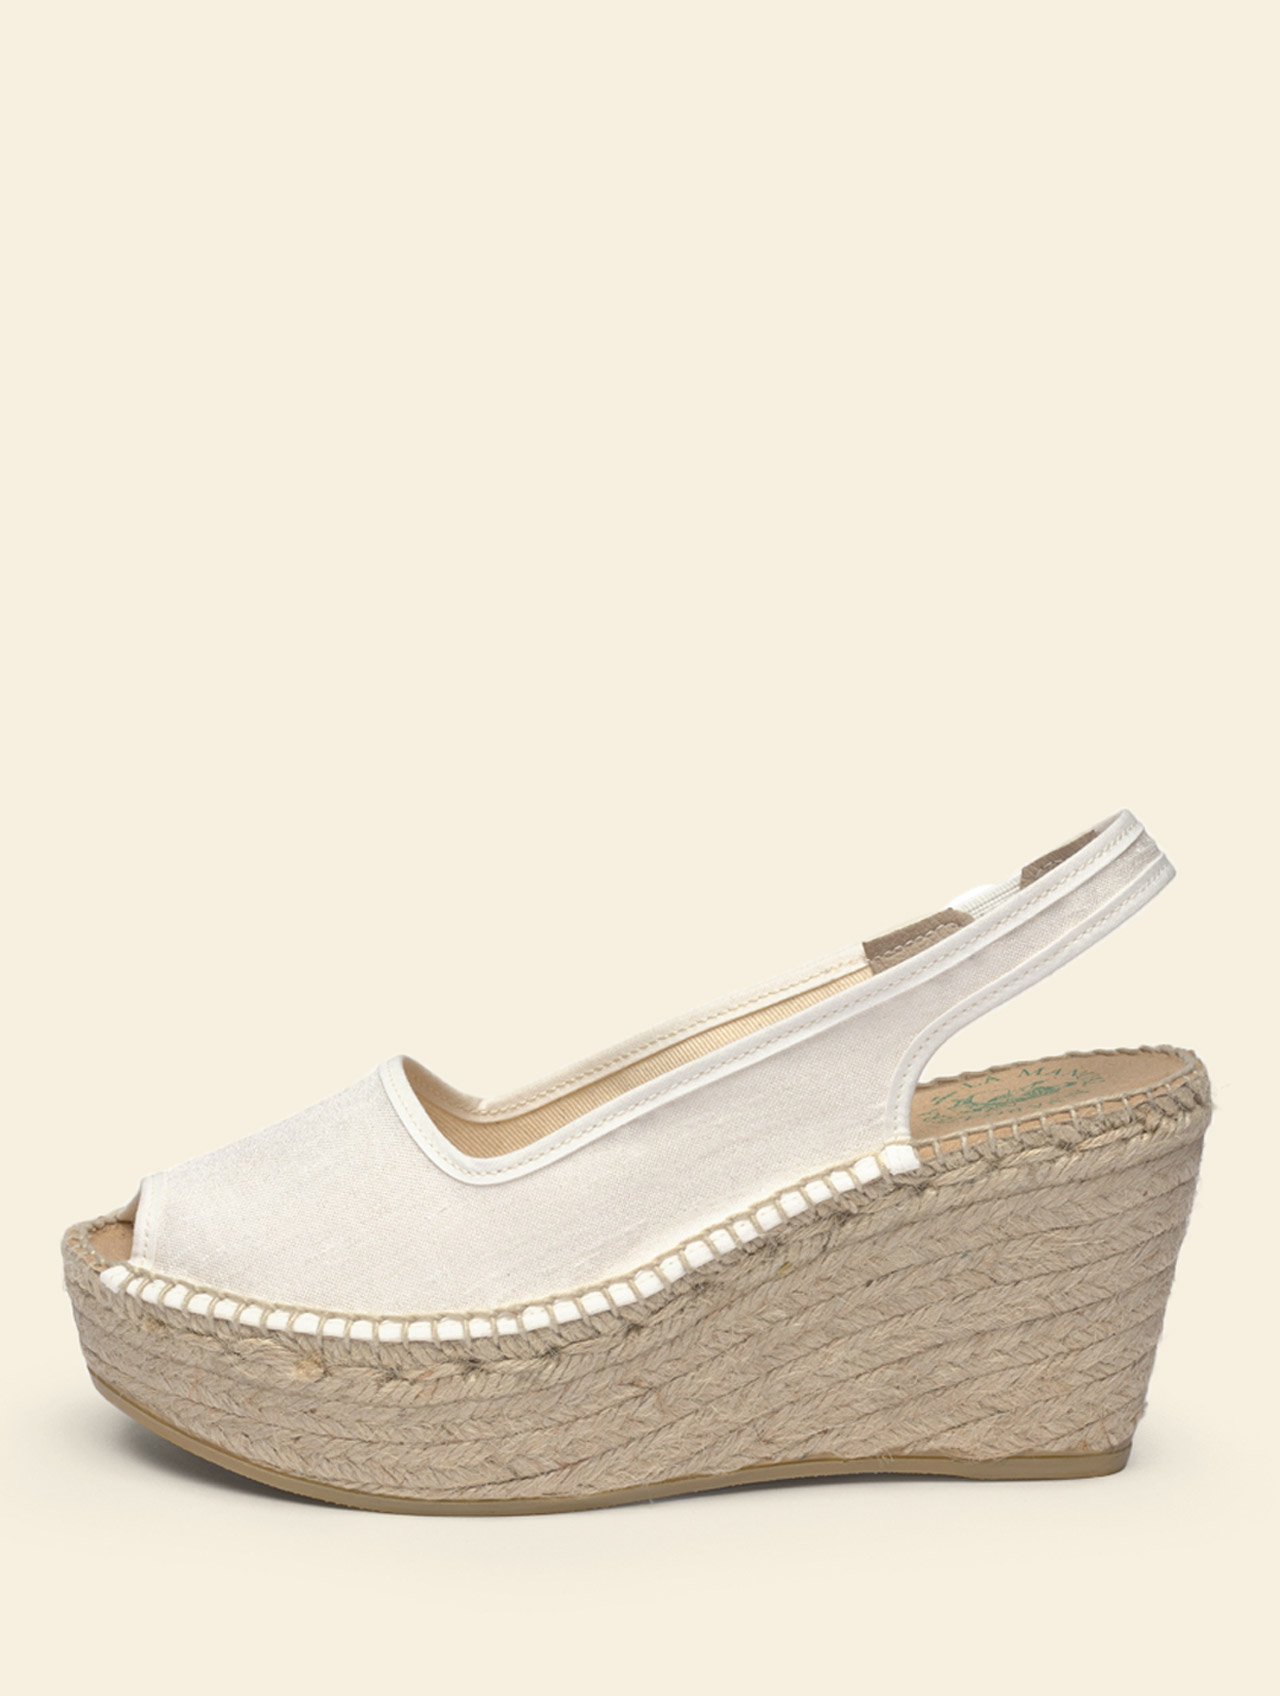 Bridal espadrille wedge about 9cms silk ivory color, natural jute wedge.